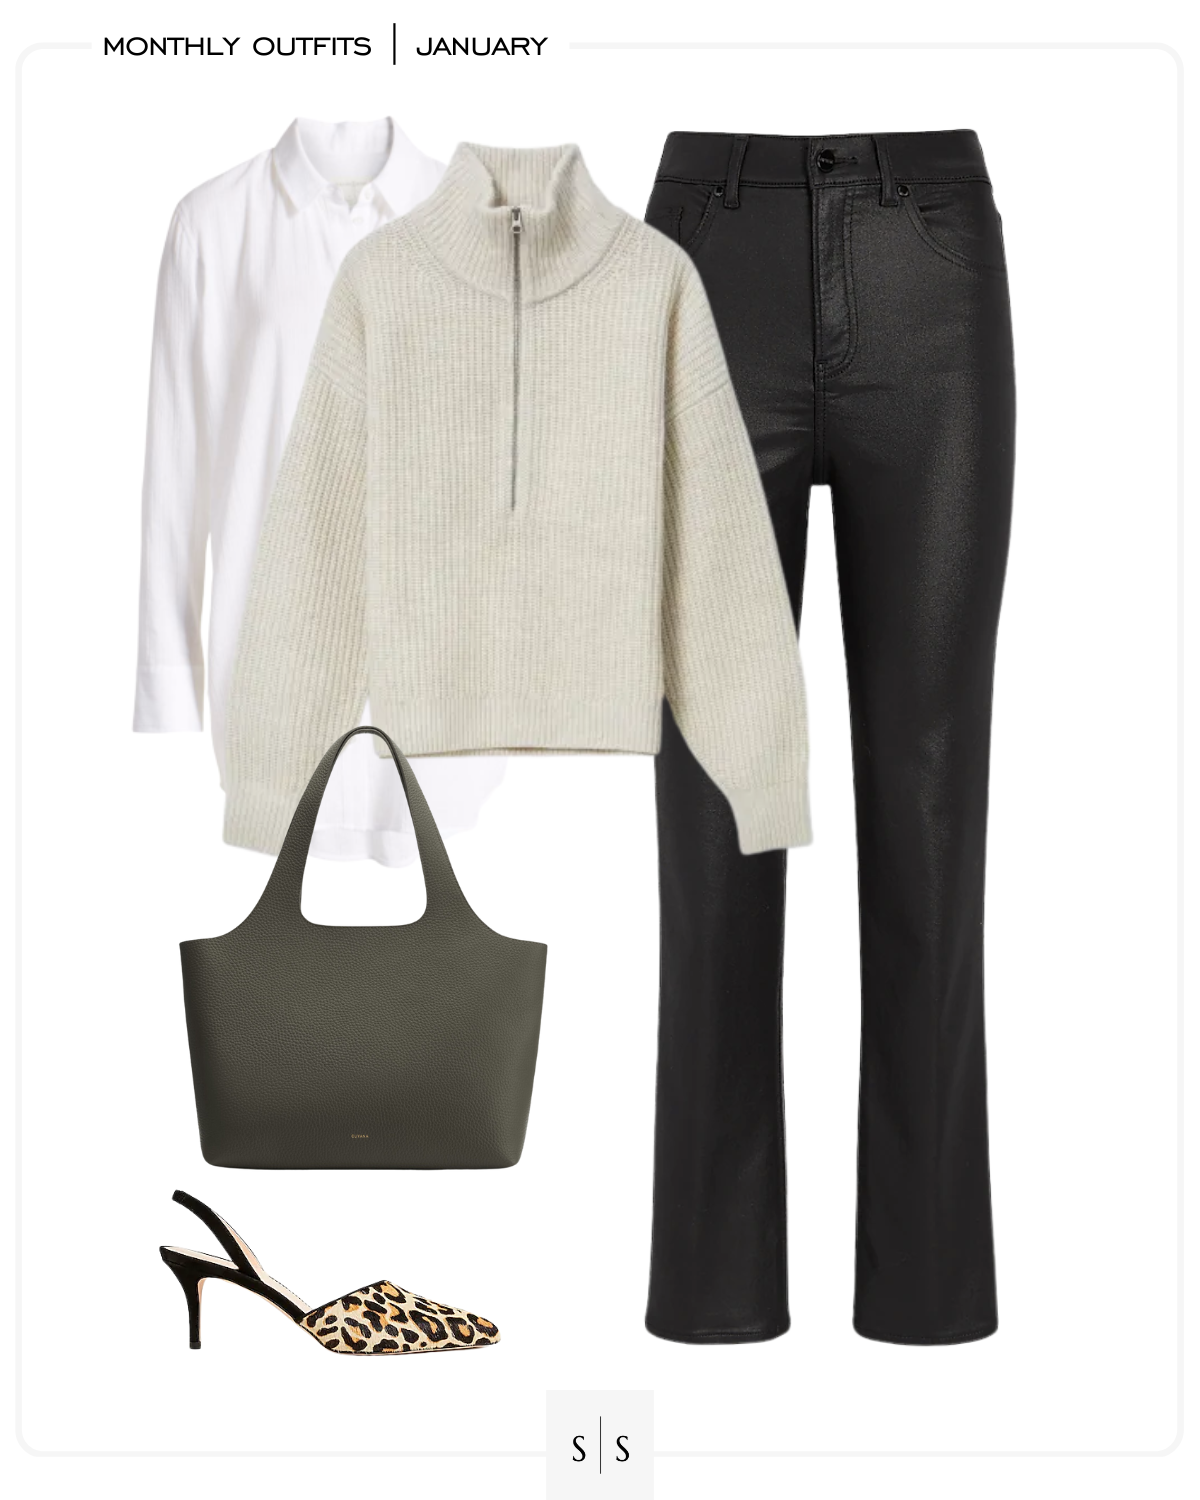 Winter workwear outfit idea coated jeans sweater classic button up